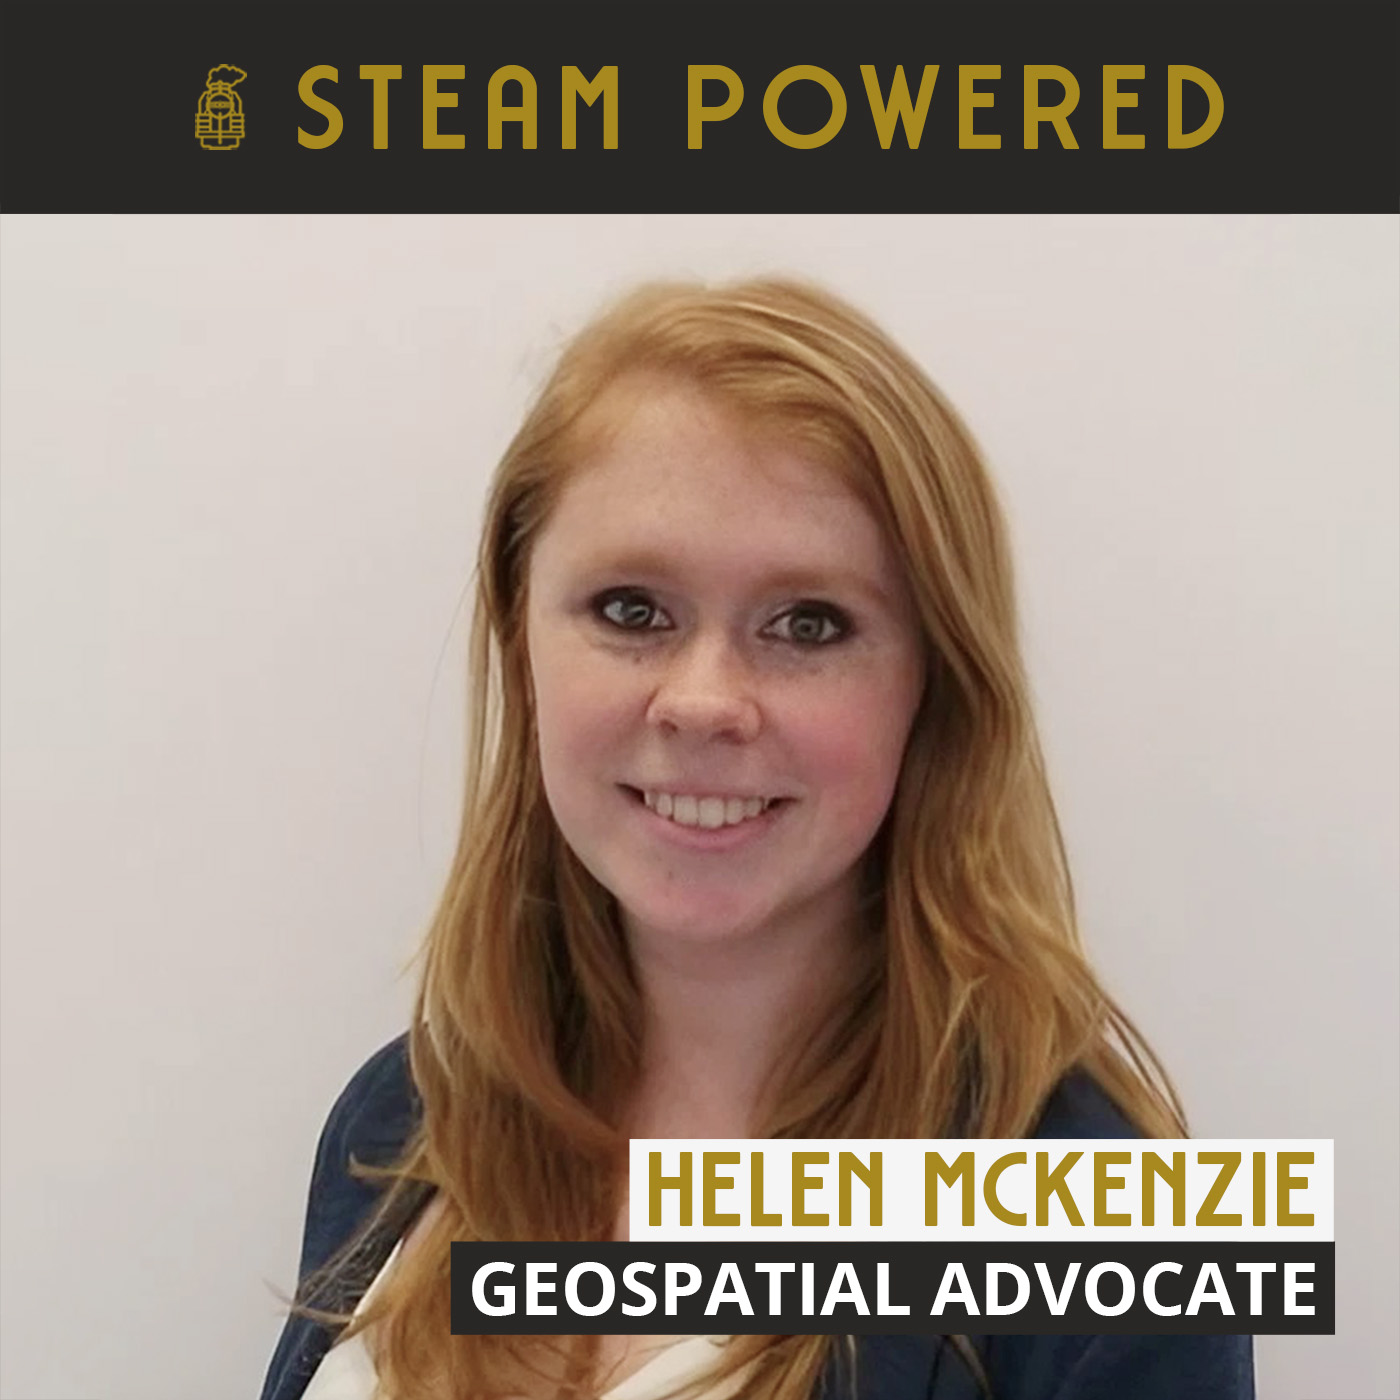 Geospatial analysis and making information beautiful with Helen McKenzie